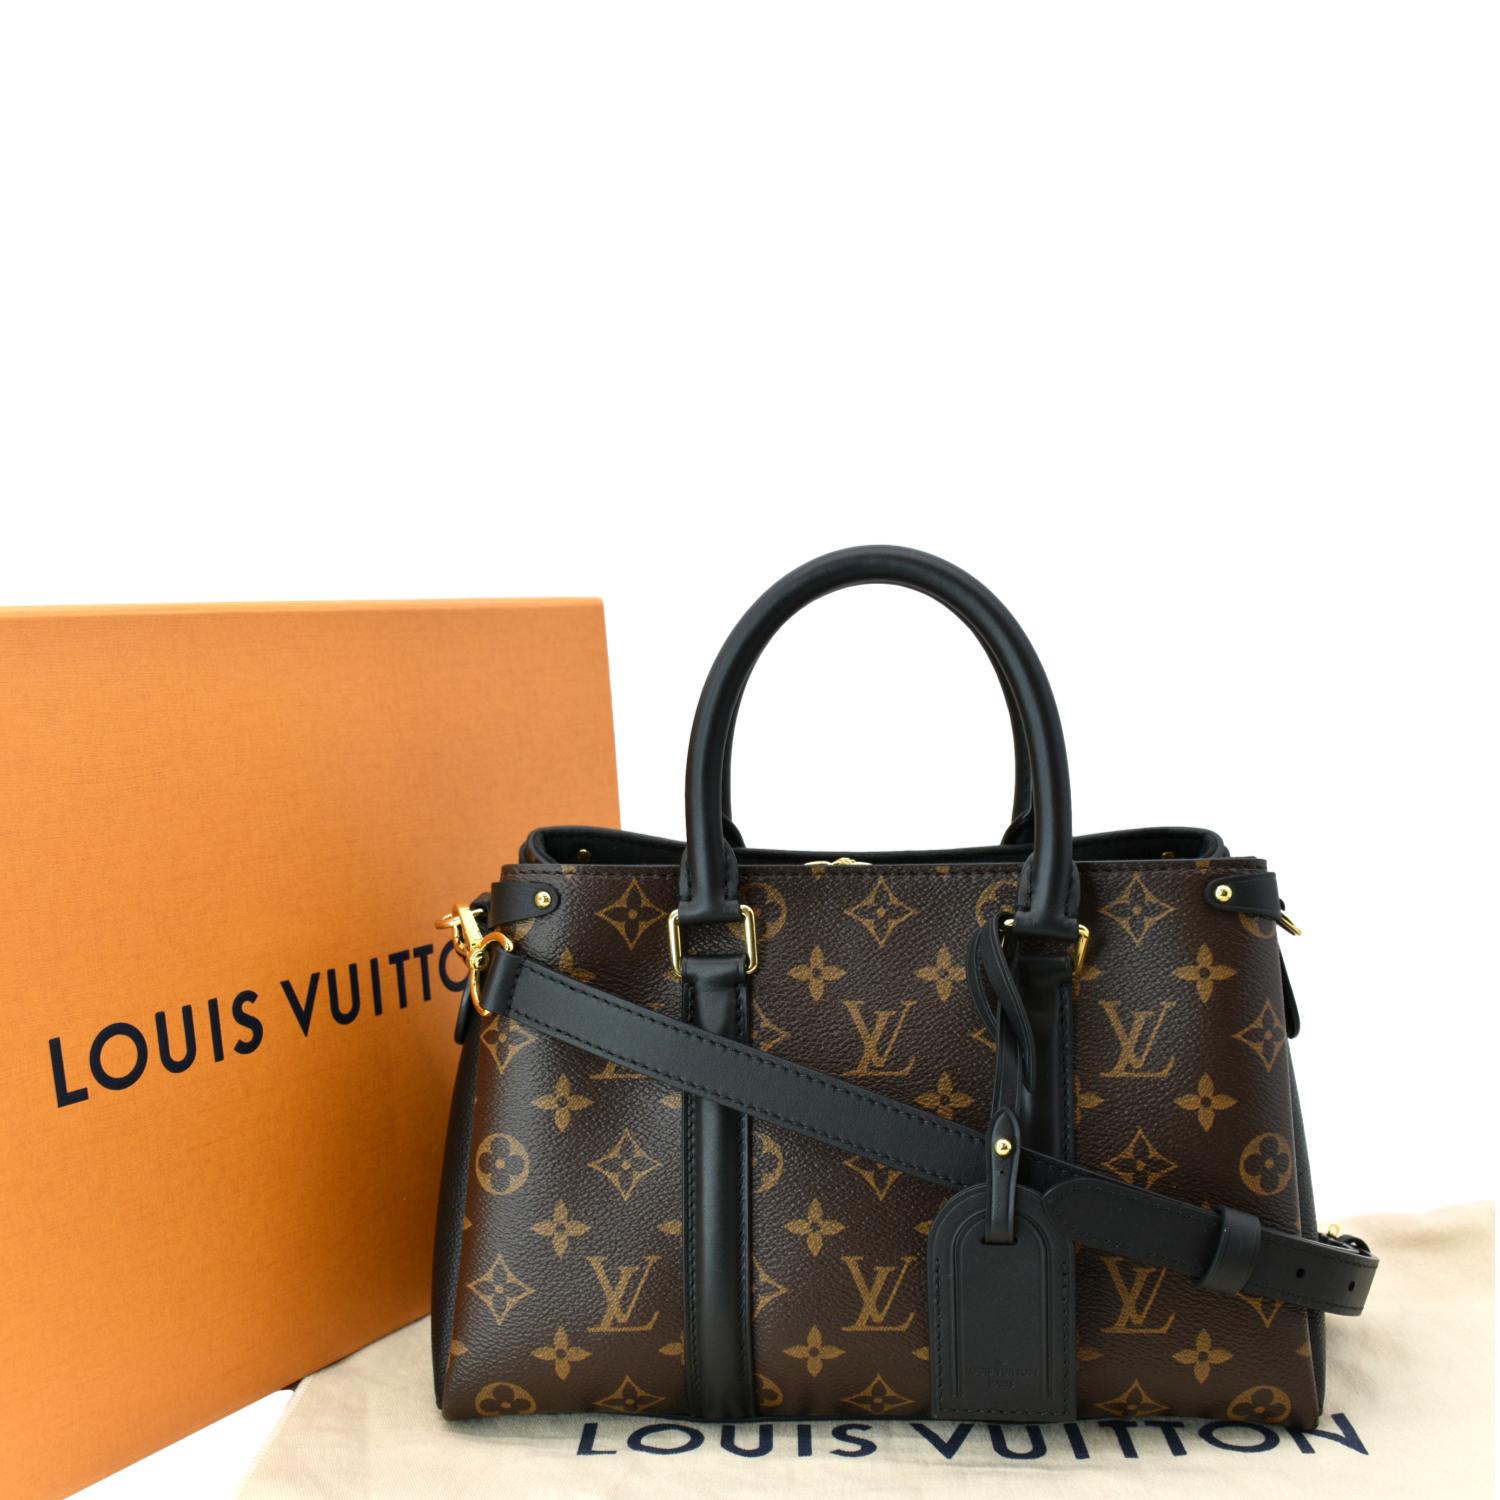 Unboxing Louis Vuitton Soufflot BB in black Epi leather (Updated